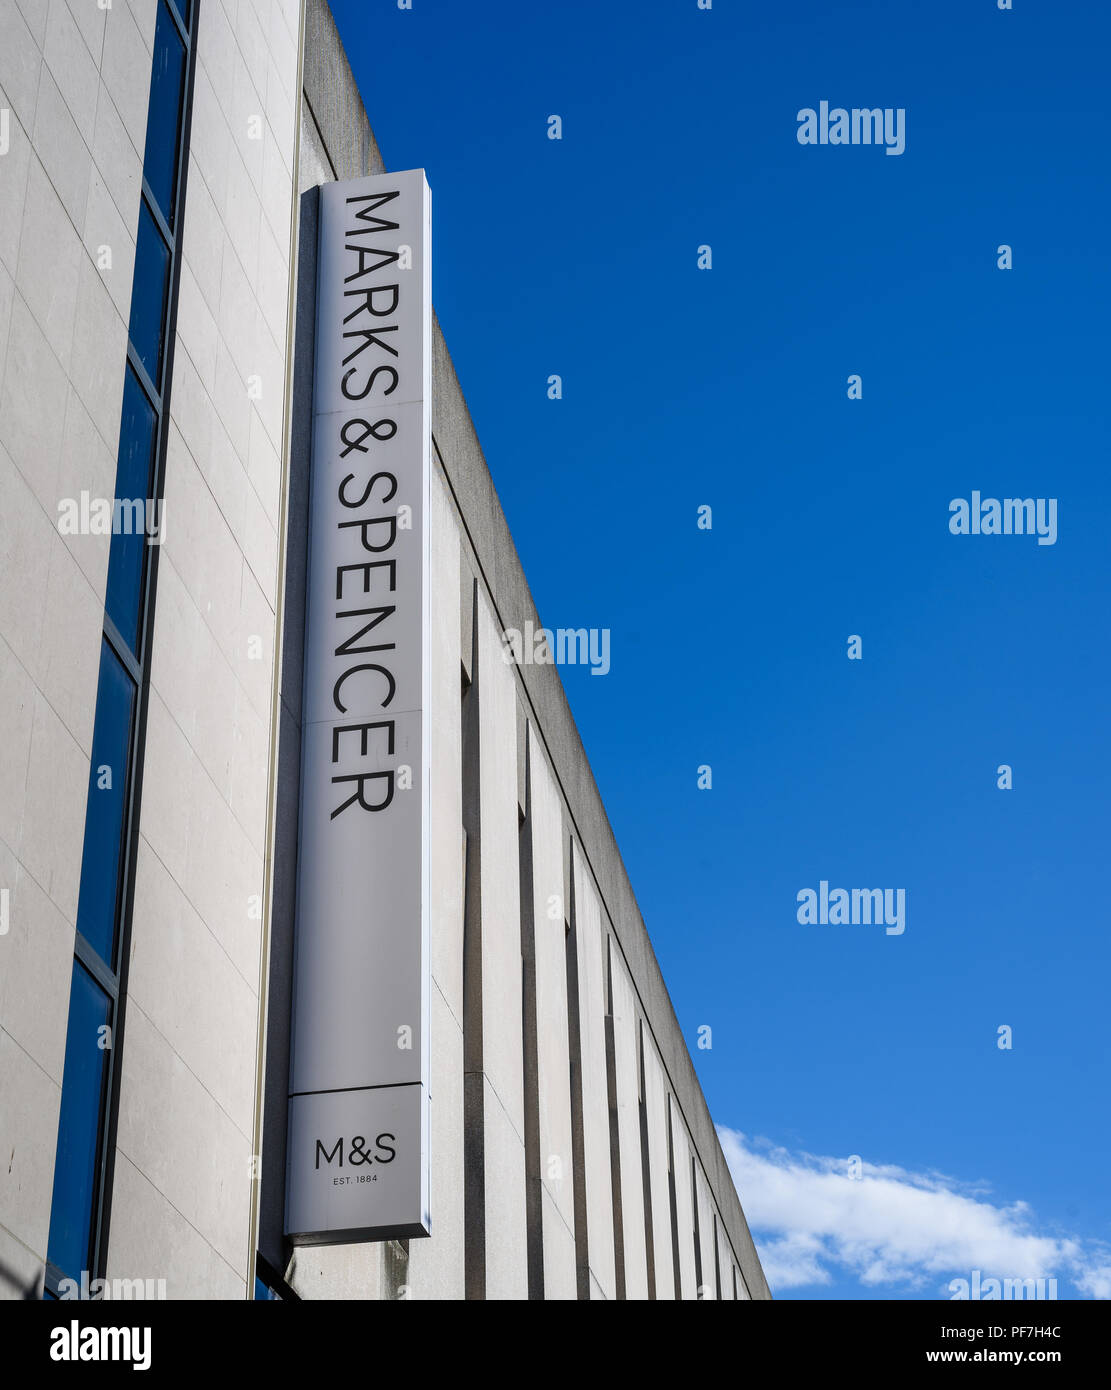 Exterior of Marks and Spencer retail store in LIverpool city centre, Merseyside, Uk. Stock Photo